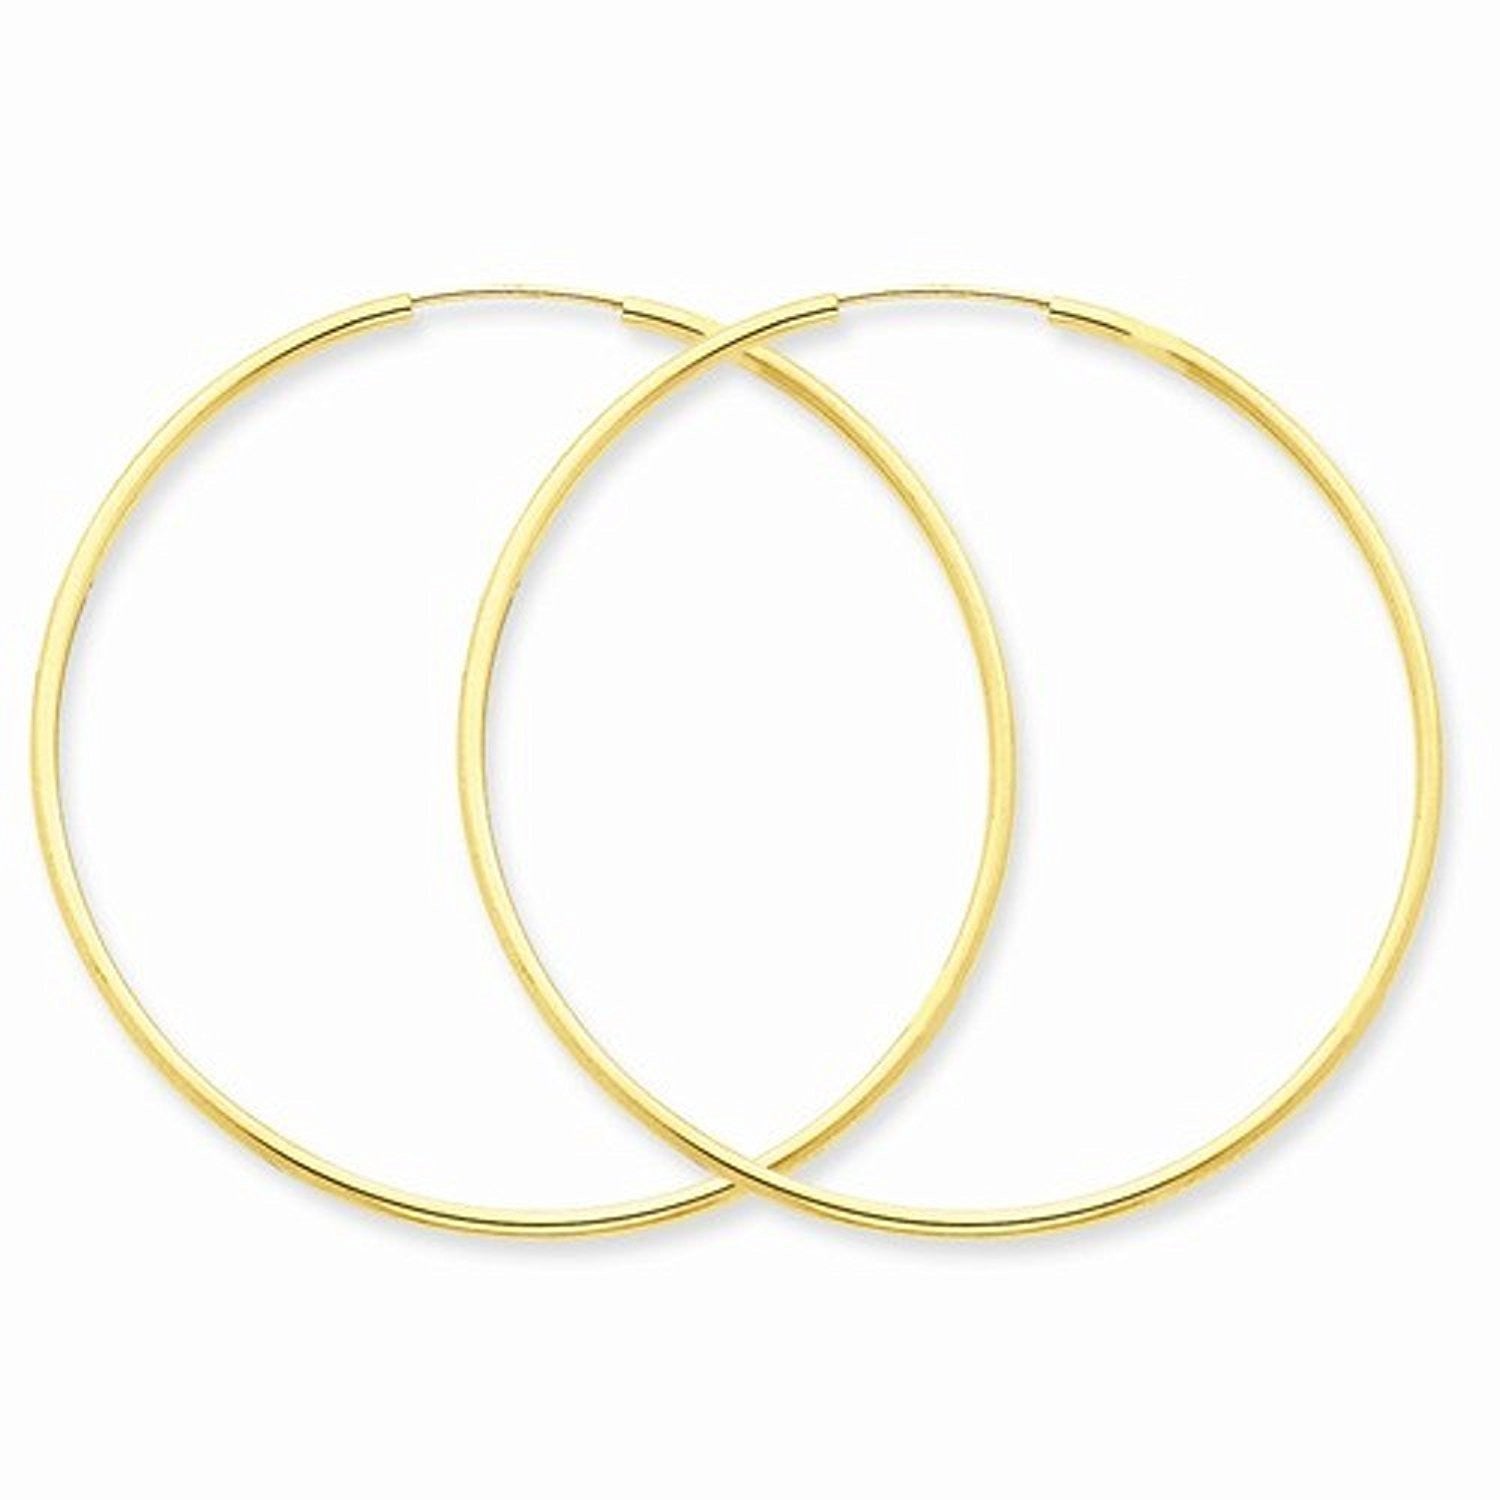 14K Yellow Gold 45mm x 1.5mm Endless Round Hoop Earrings